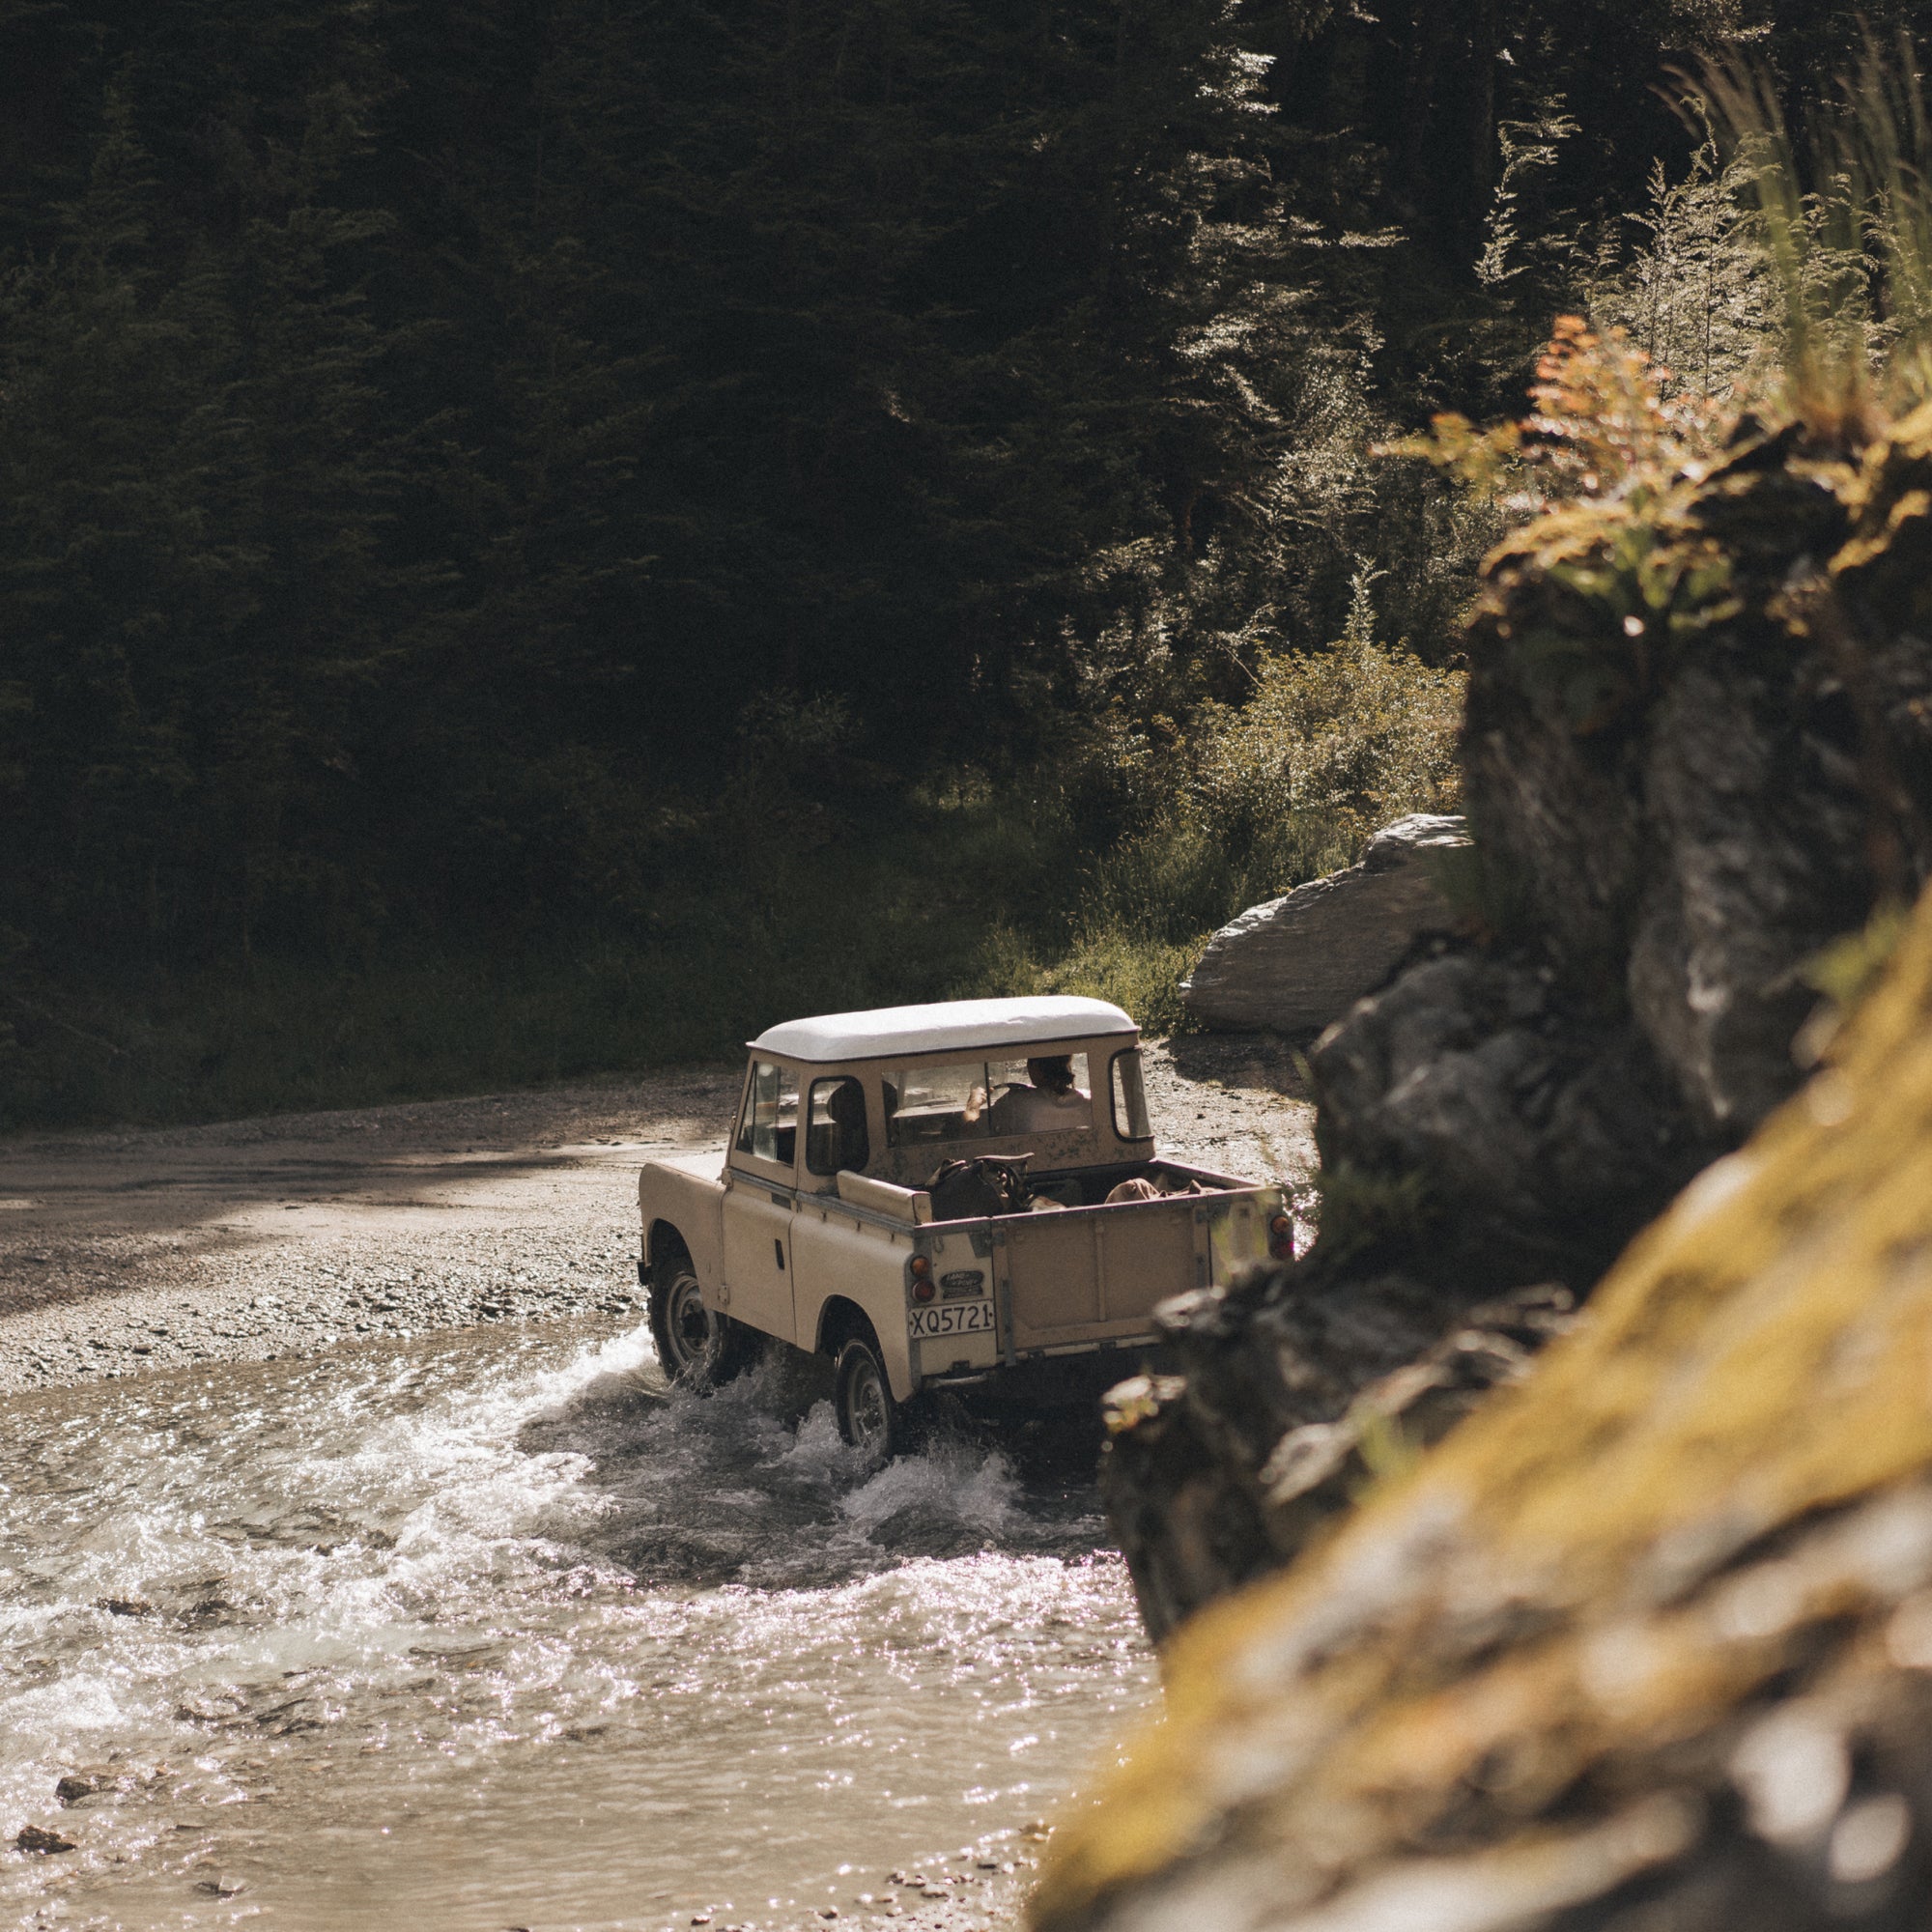 Loz and Alex driving their land rover through a water crossing in New Zealand